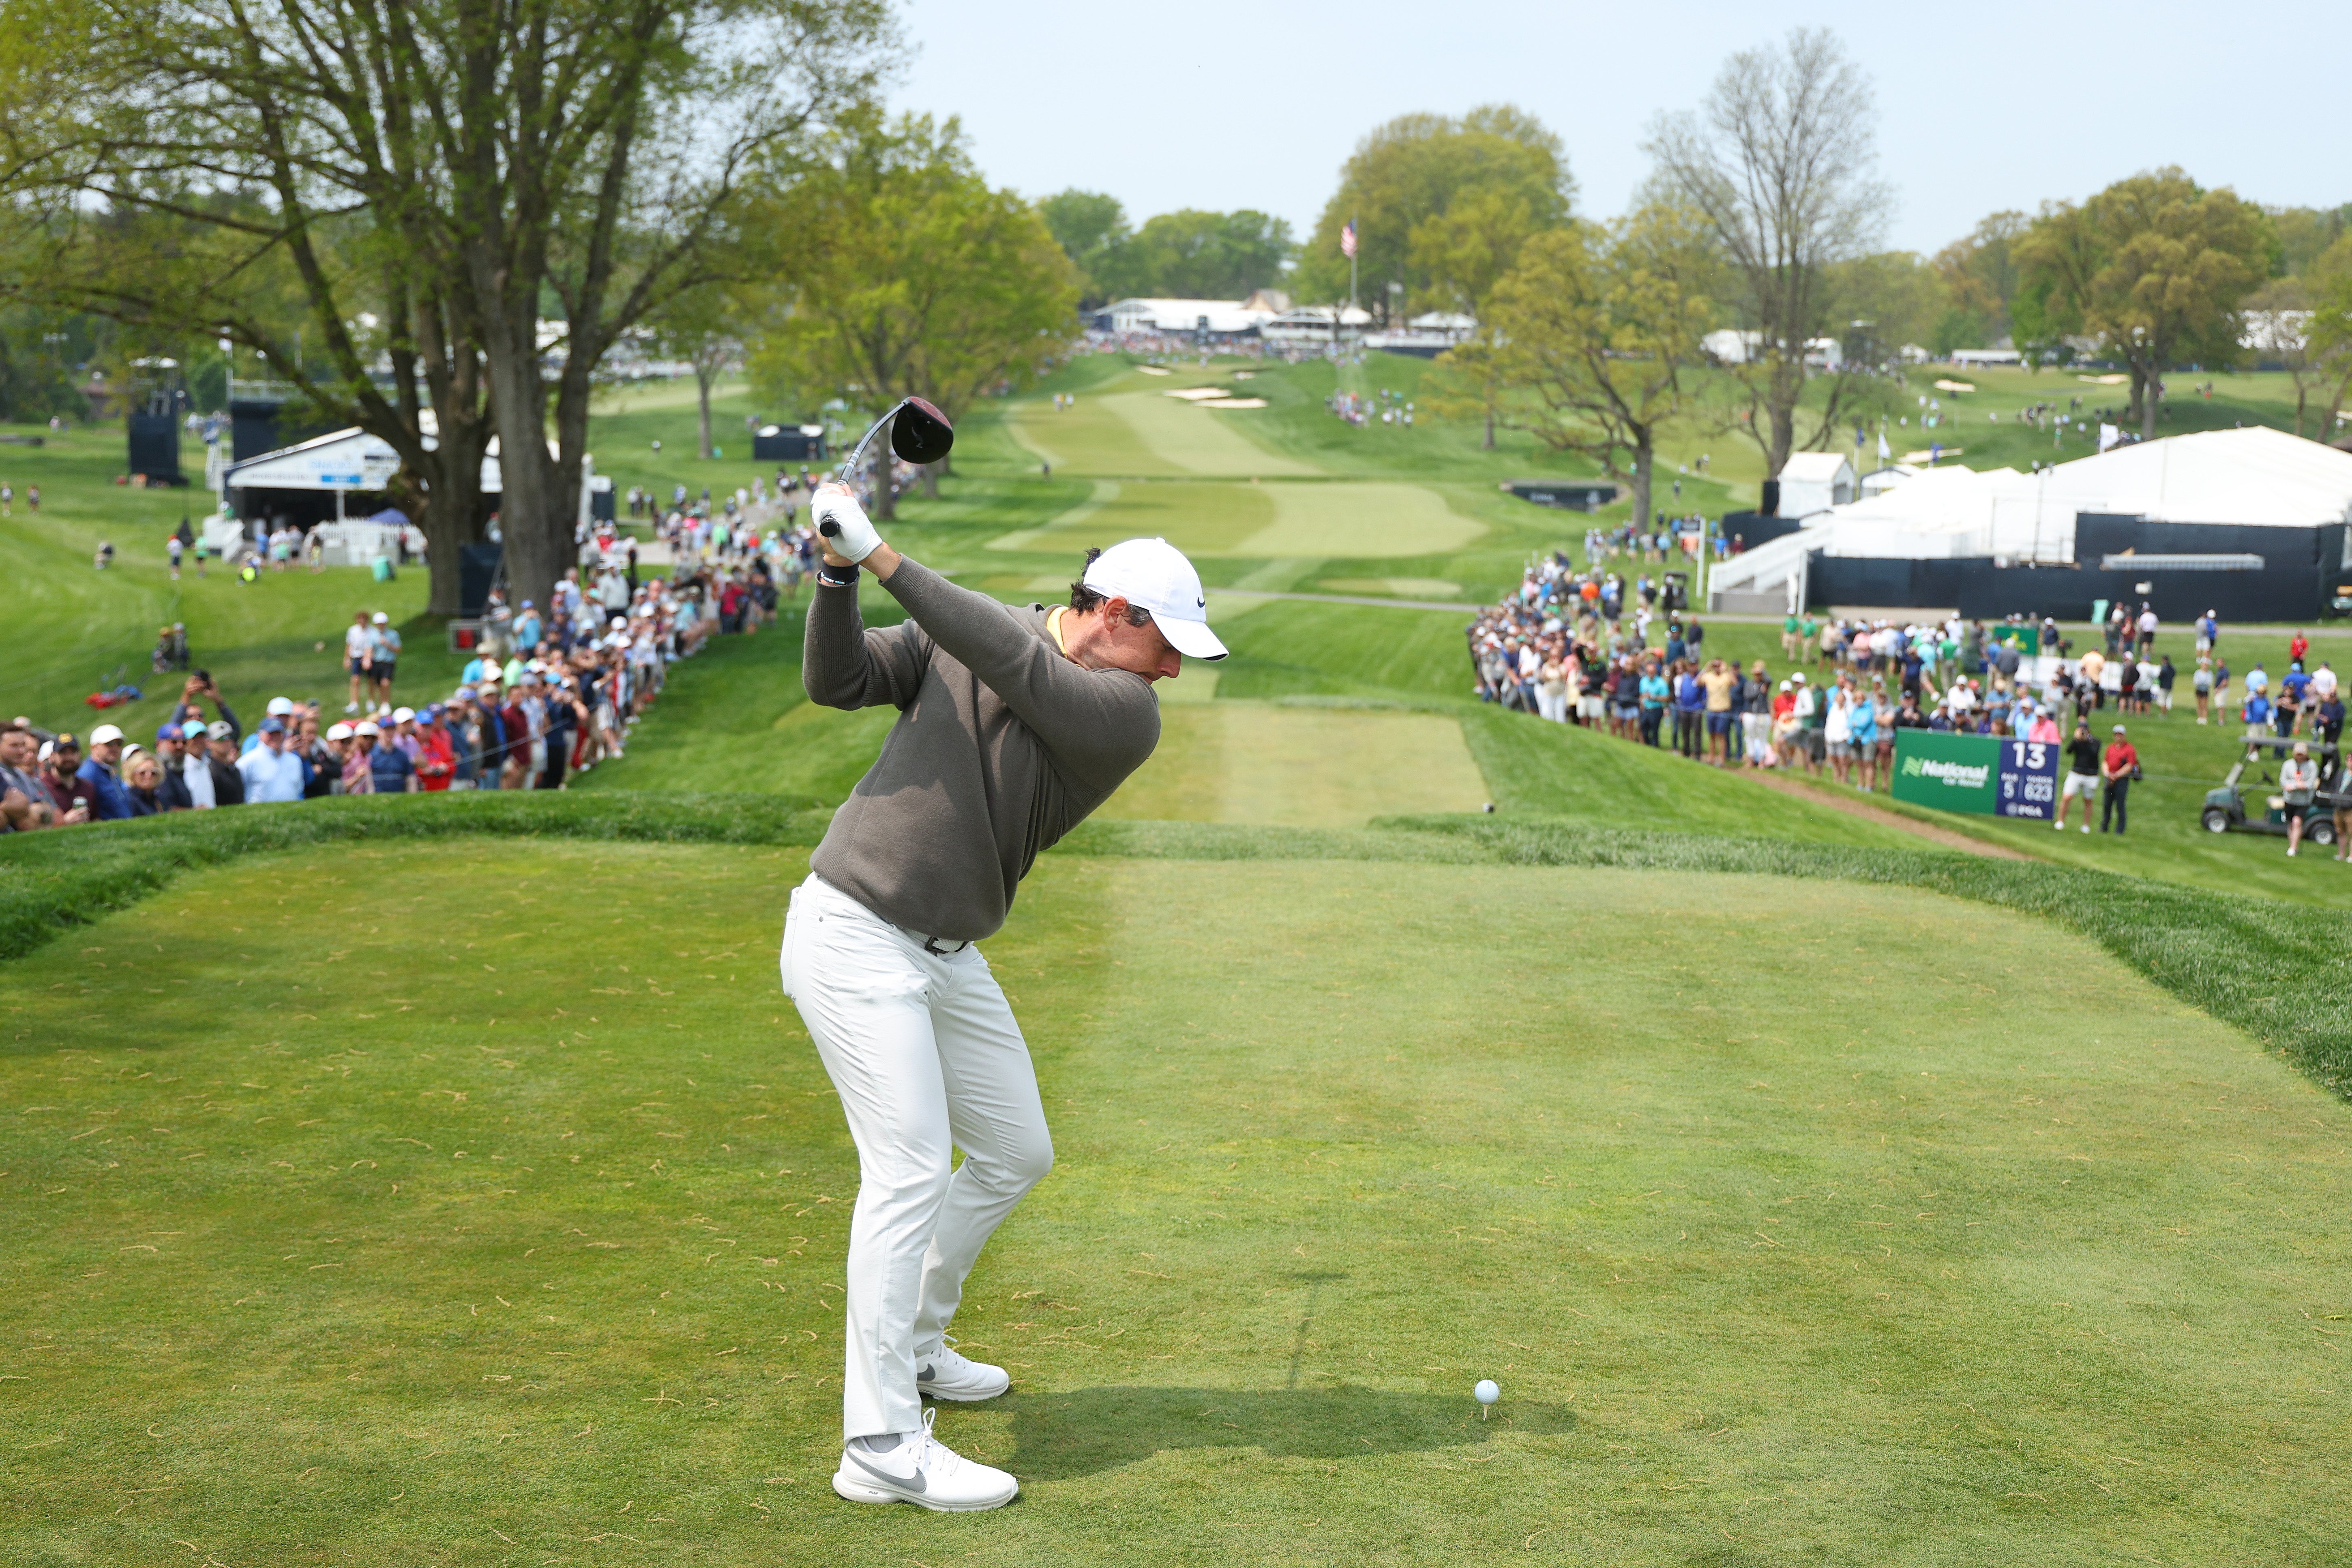 Rory McIlroy is among the contenders for the 2023 PGA Championship